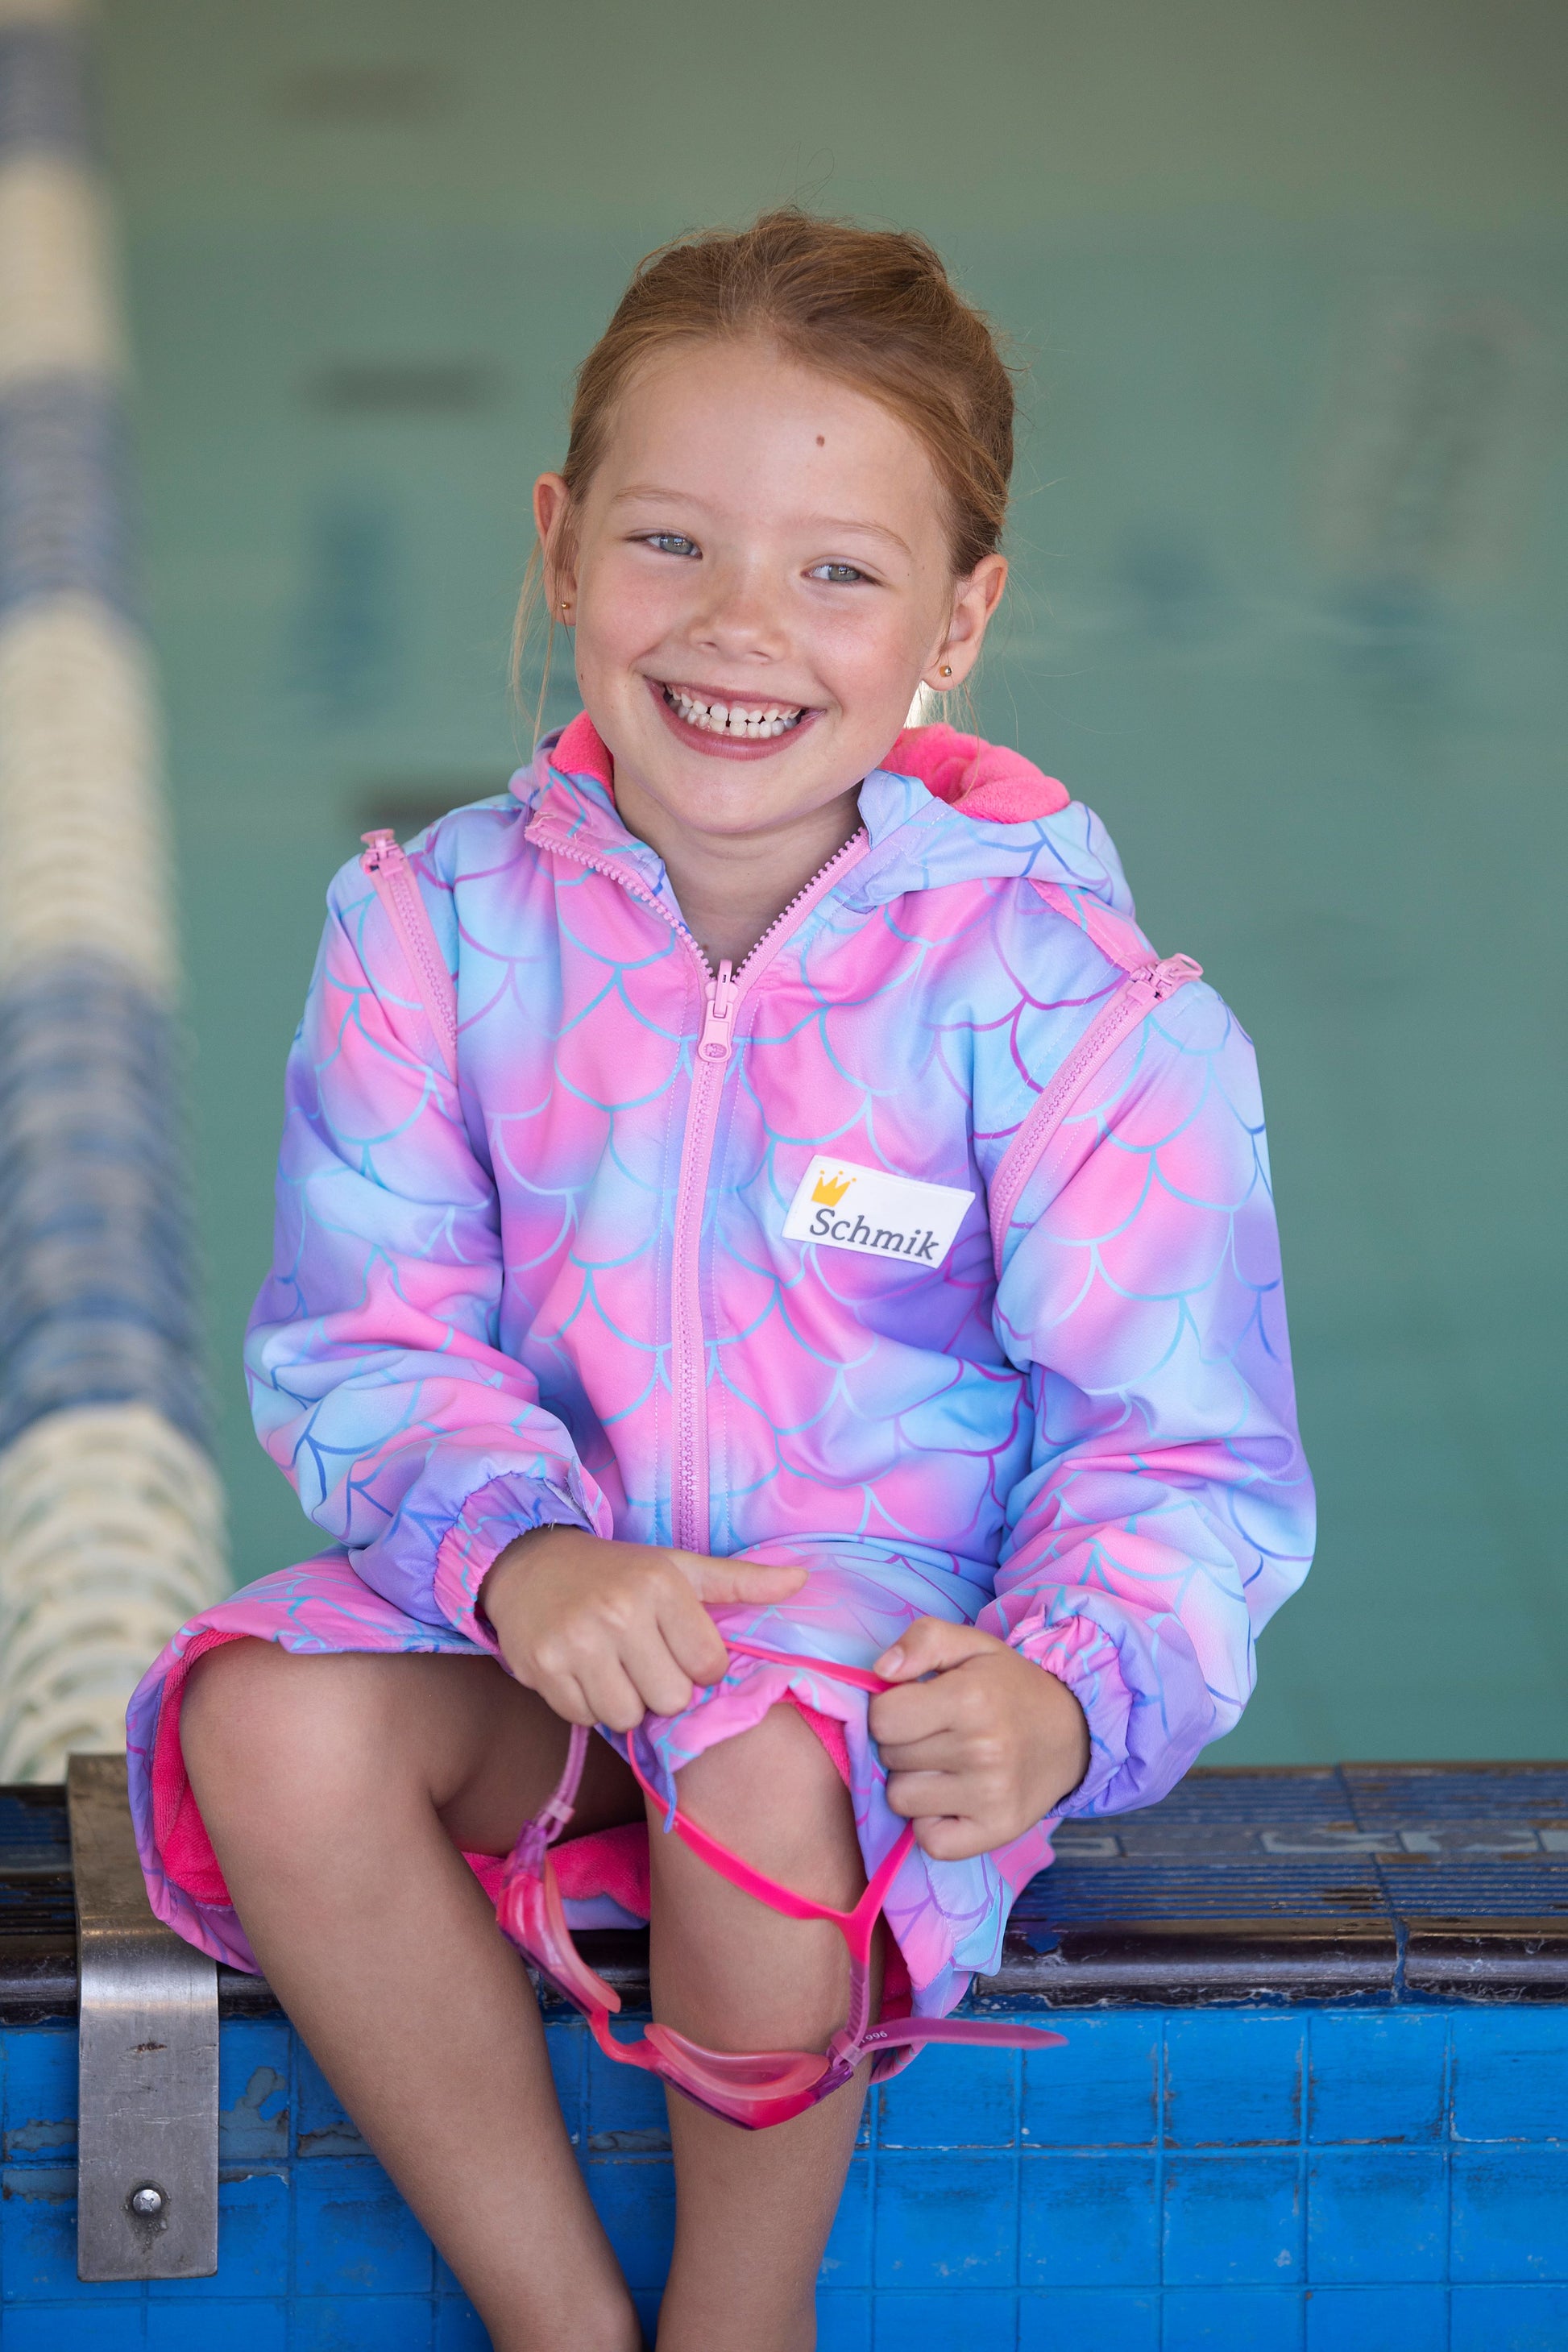 Child sitting on edge of pool. Child is wearing mermaid print swim parka and is holding goggles. Mermaid print swim parka is pink with mermaid sclales printed all over it. 